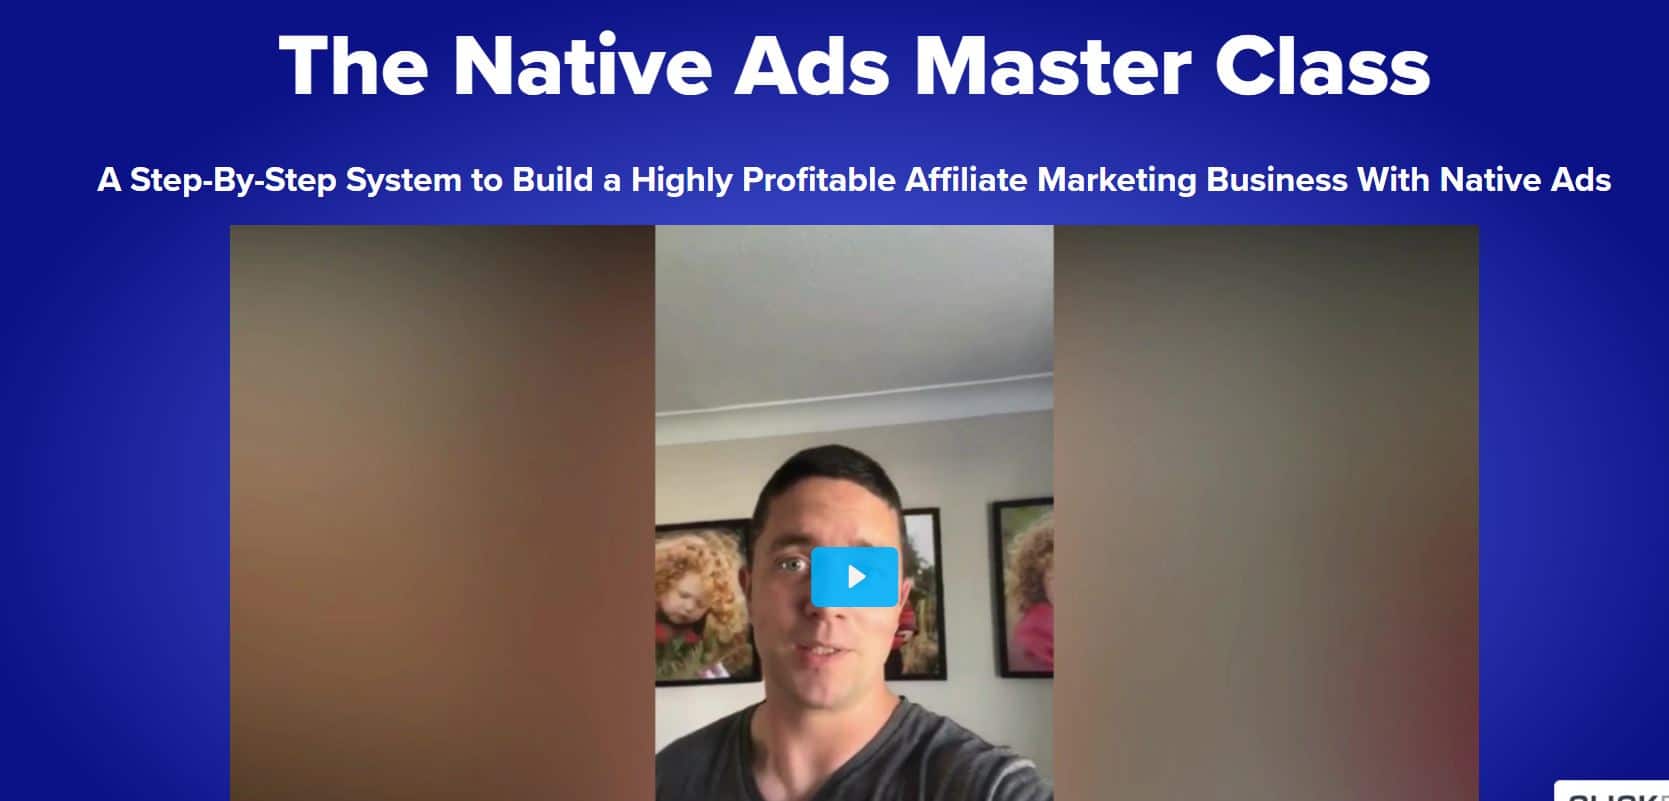 David Ford and Tom Bell - The Native Ads Master Class